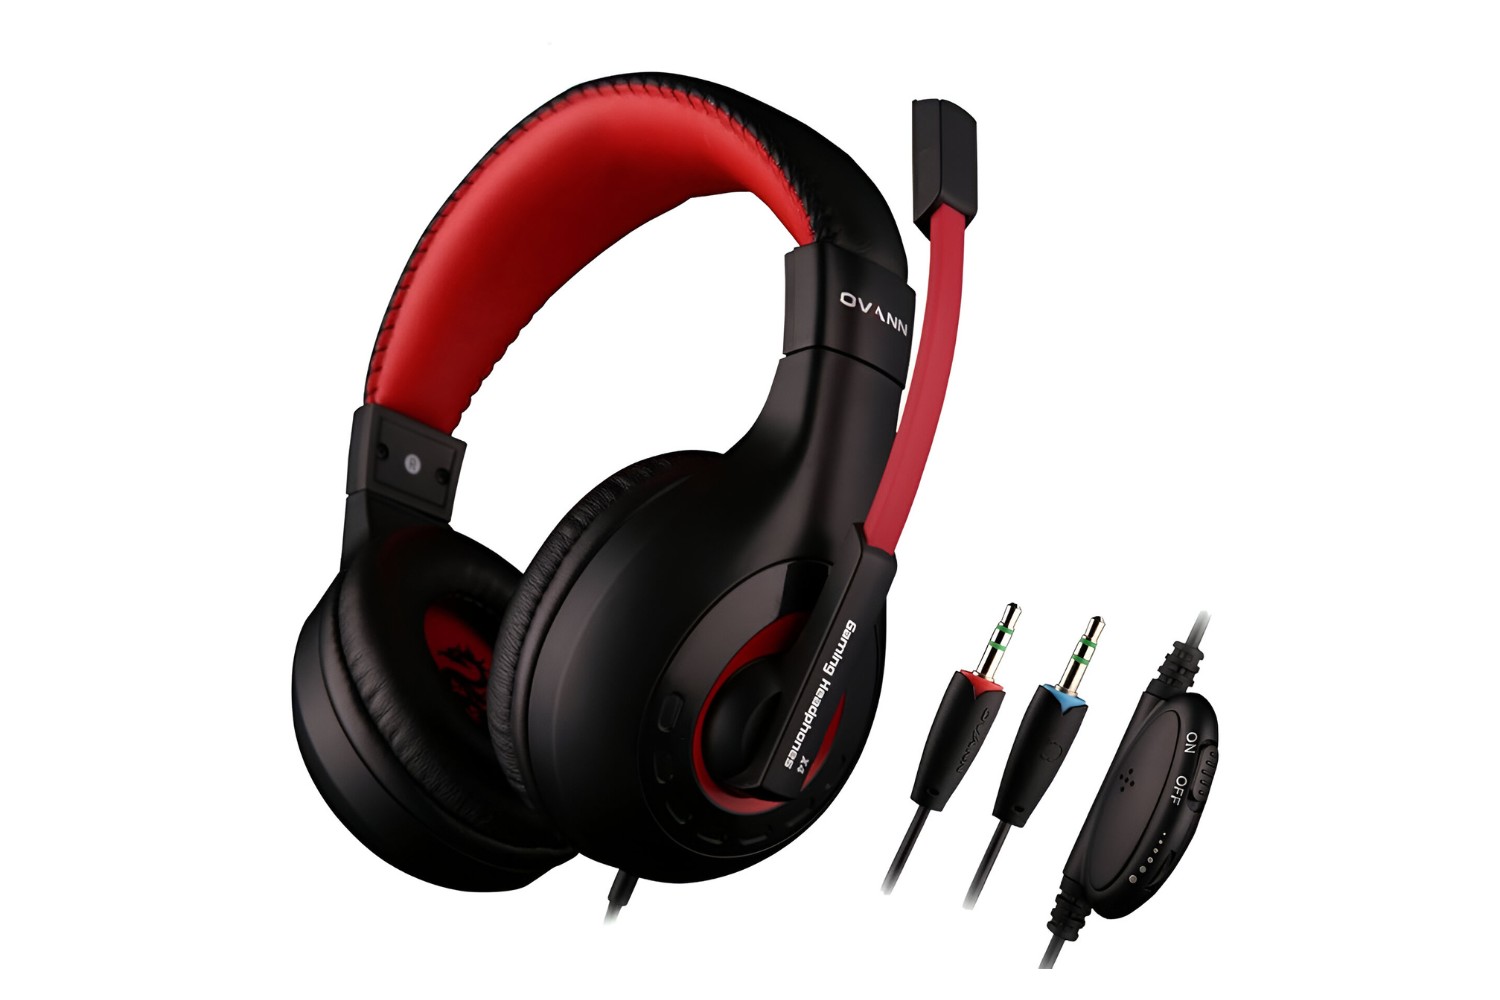 ovann-x-stereo-pc-gaming-headset-how-to-work